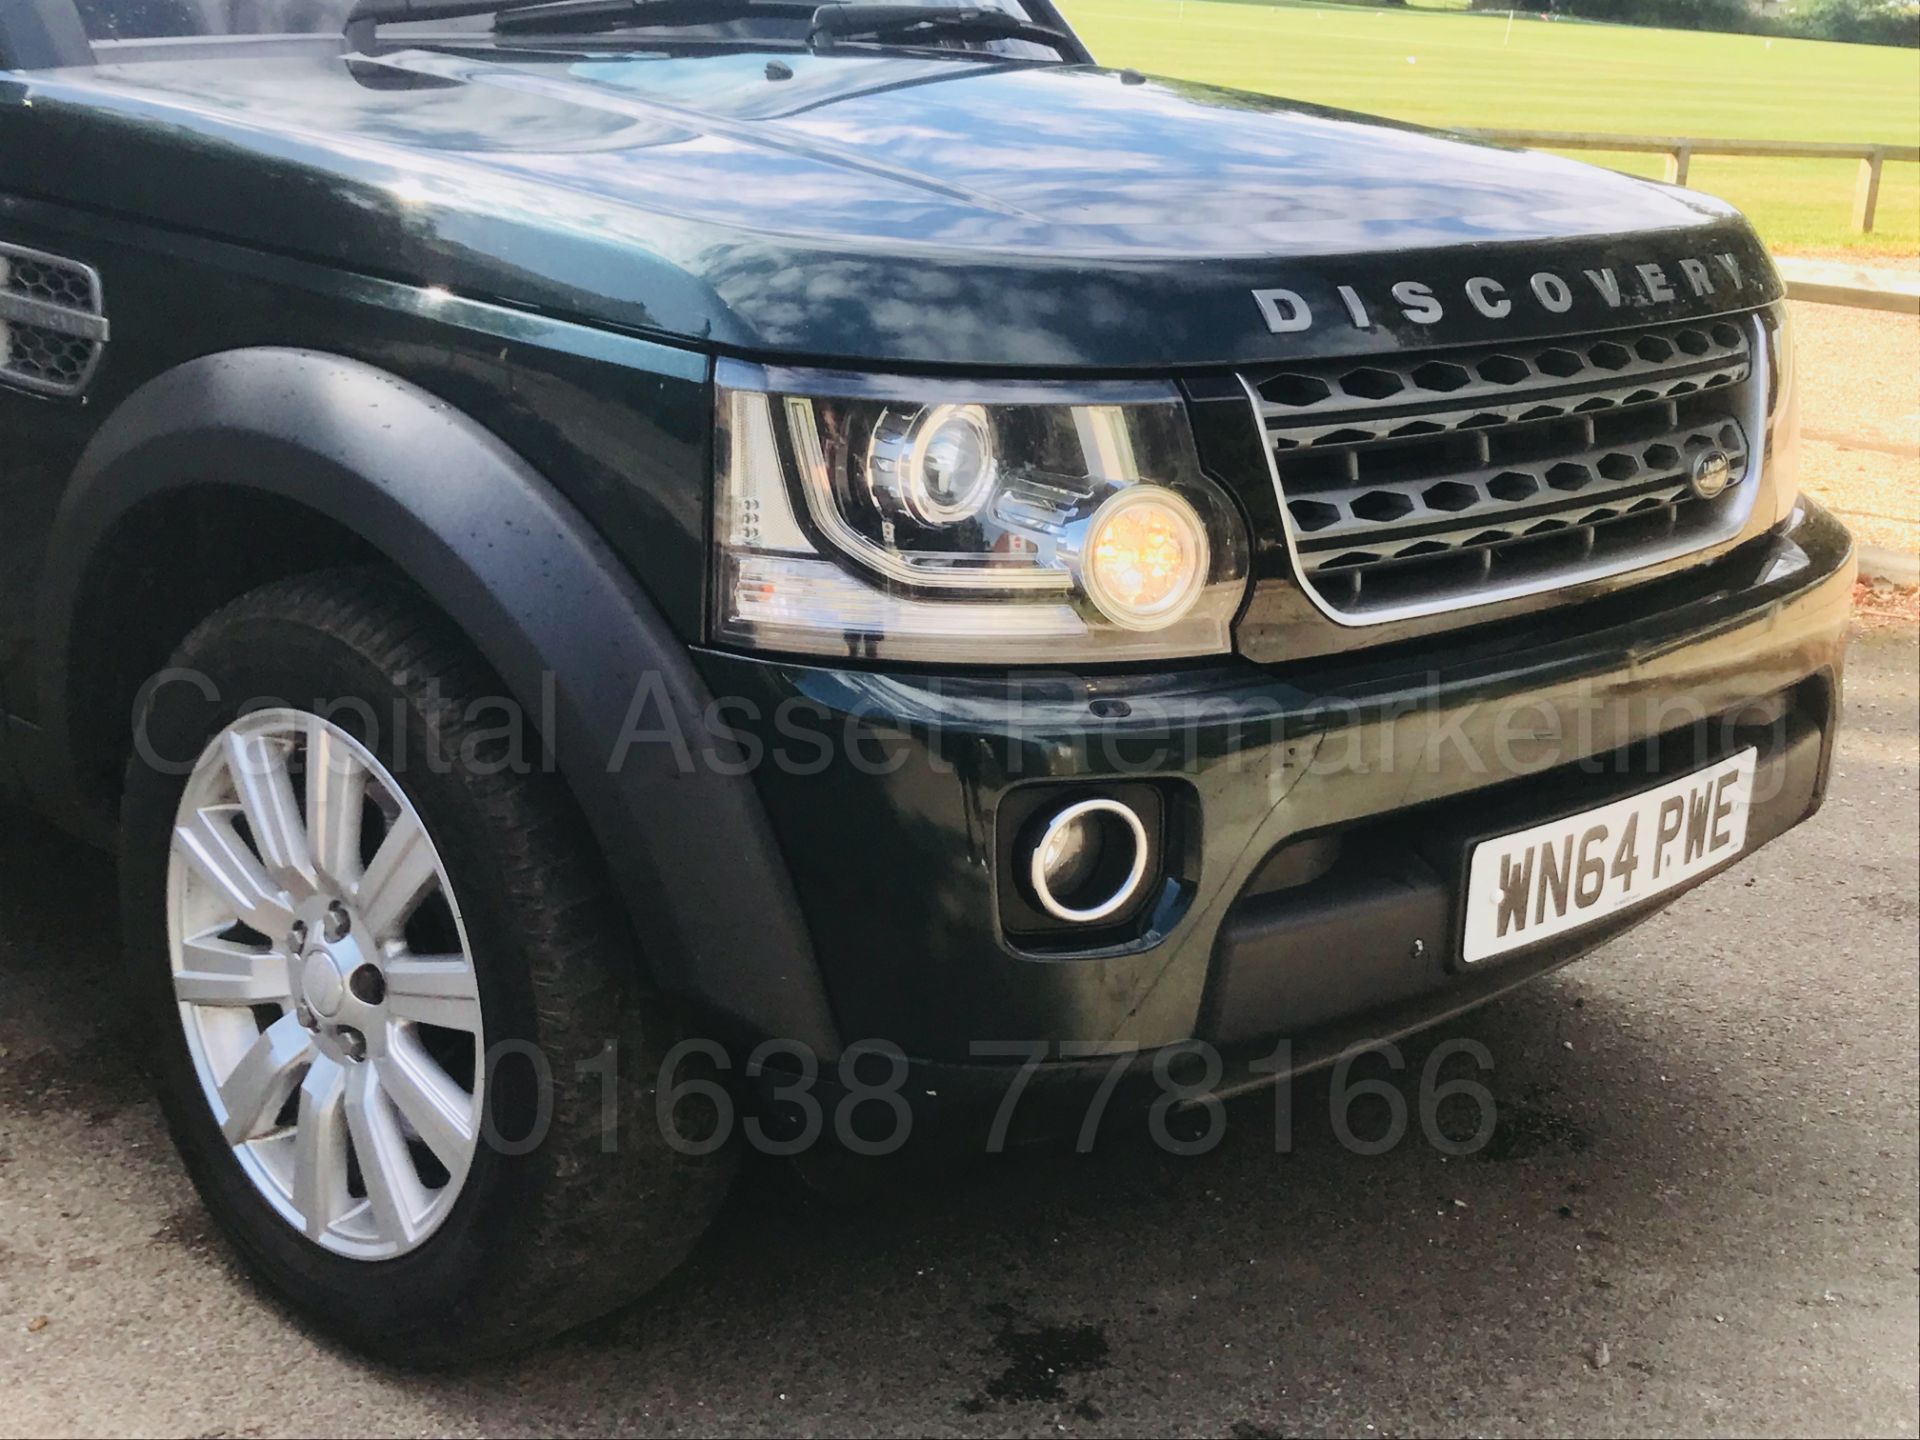 LAND ROVER DISCOVERY *XS EDITION* (2014) '3.0 SDV6 - 225 BHP- 8 SPEED AUTO' *MASSIVE SPEC* - Image 13 of 45